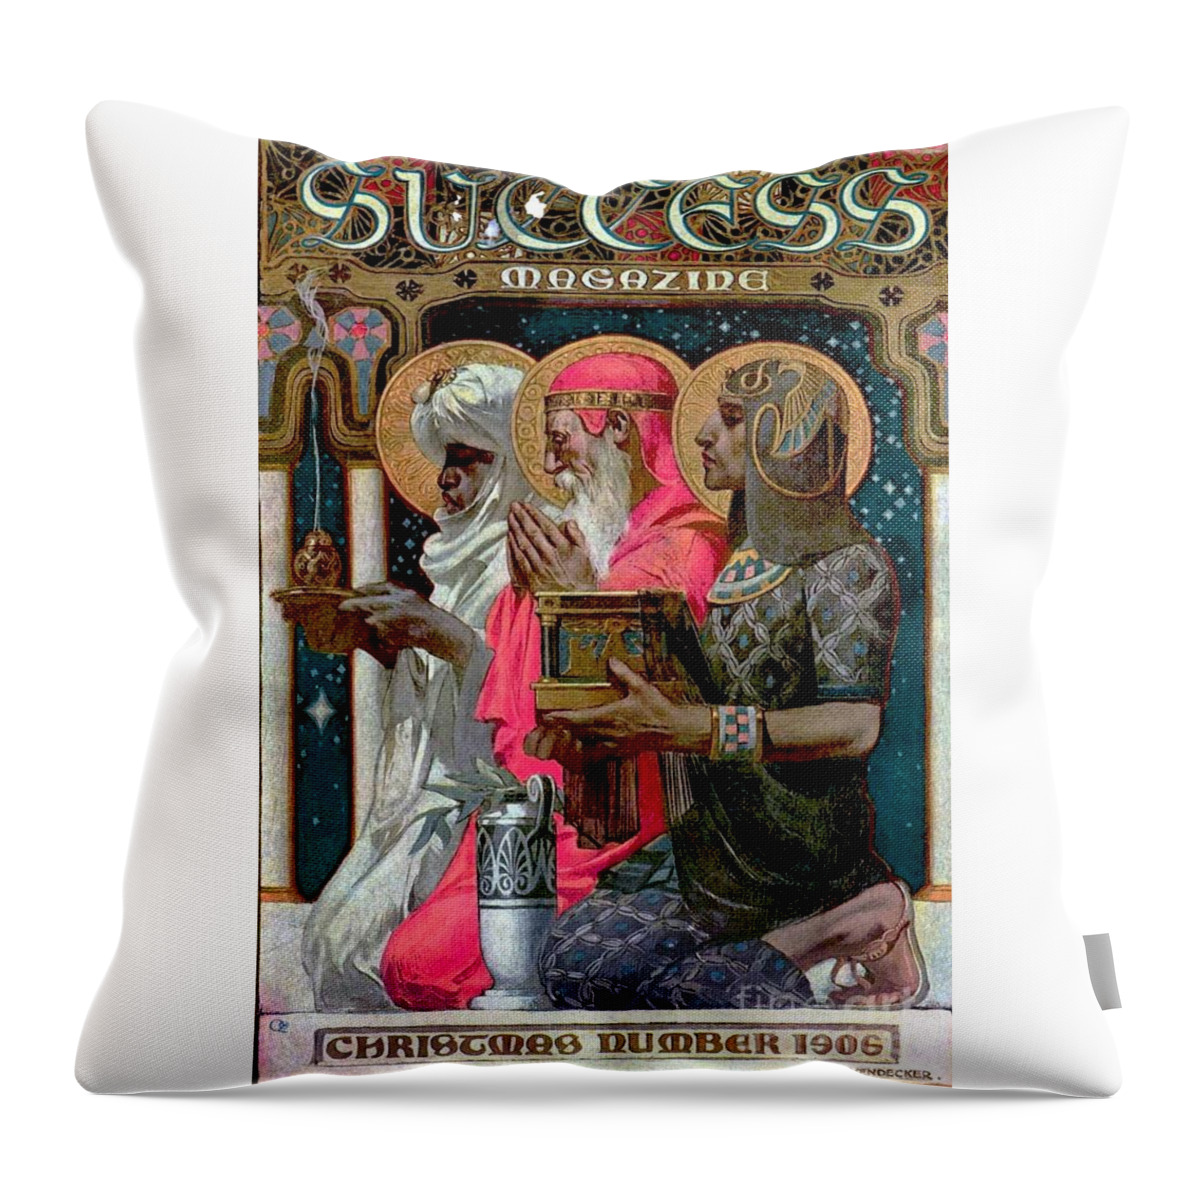 Joseph Christian Leyendecker Throw Pillow featuring the painting Success Magazine Christmas by MotionAge Designs